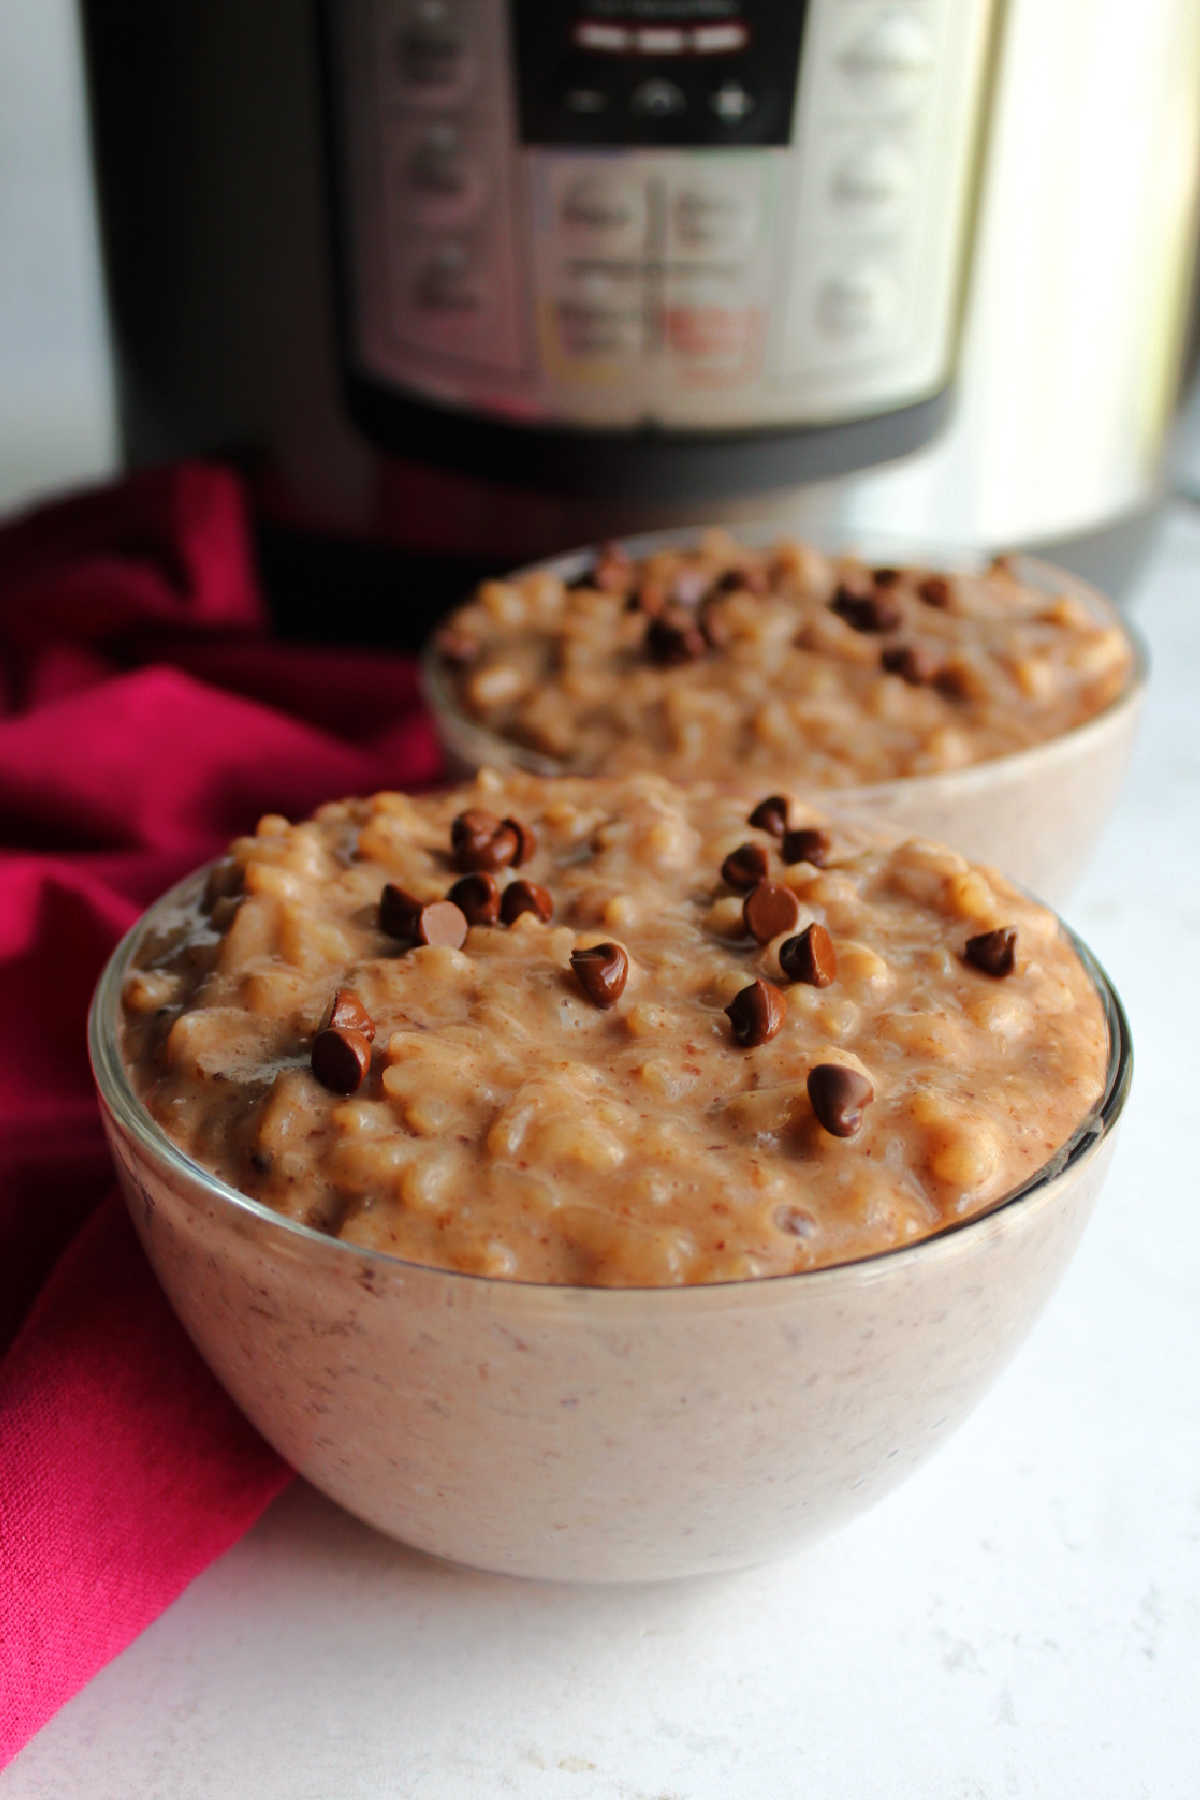 Bowls of chocolate rice pudding topped with mini chocolate chips.